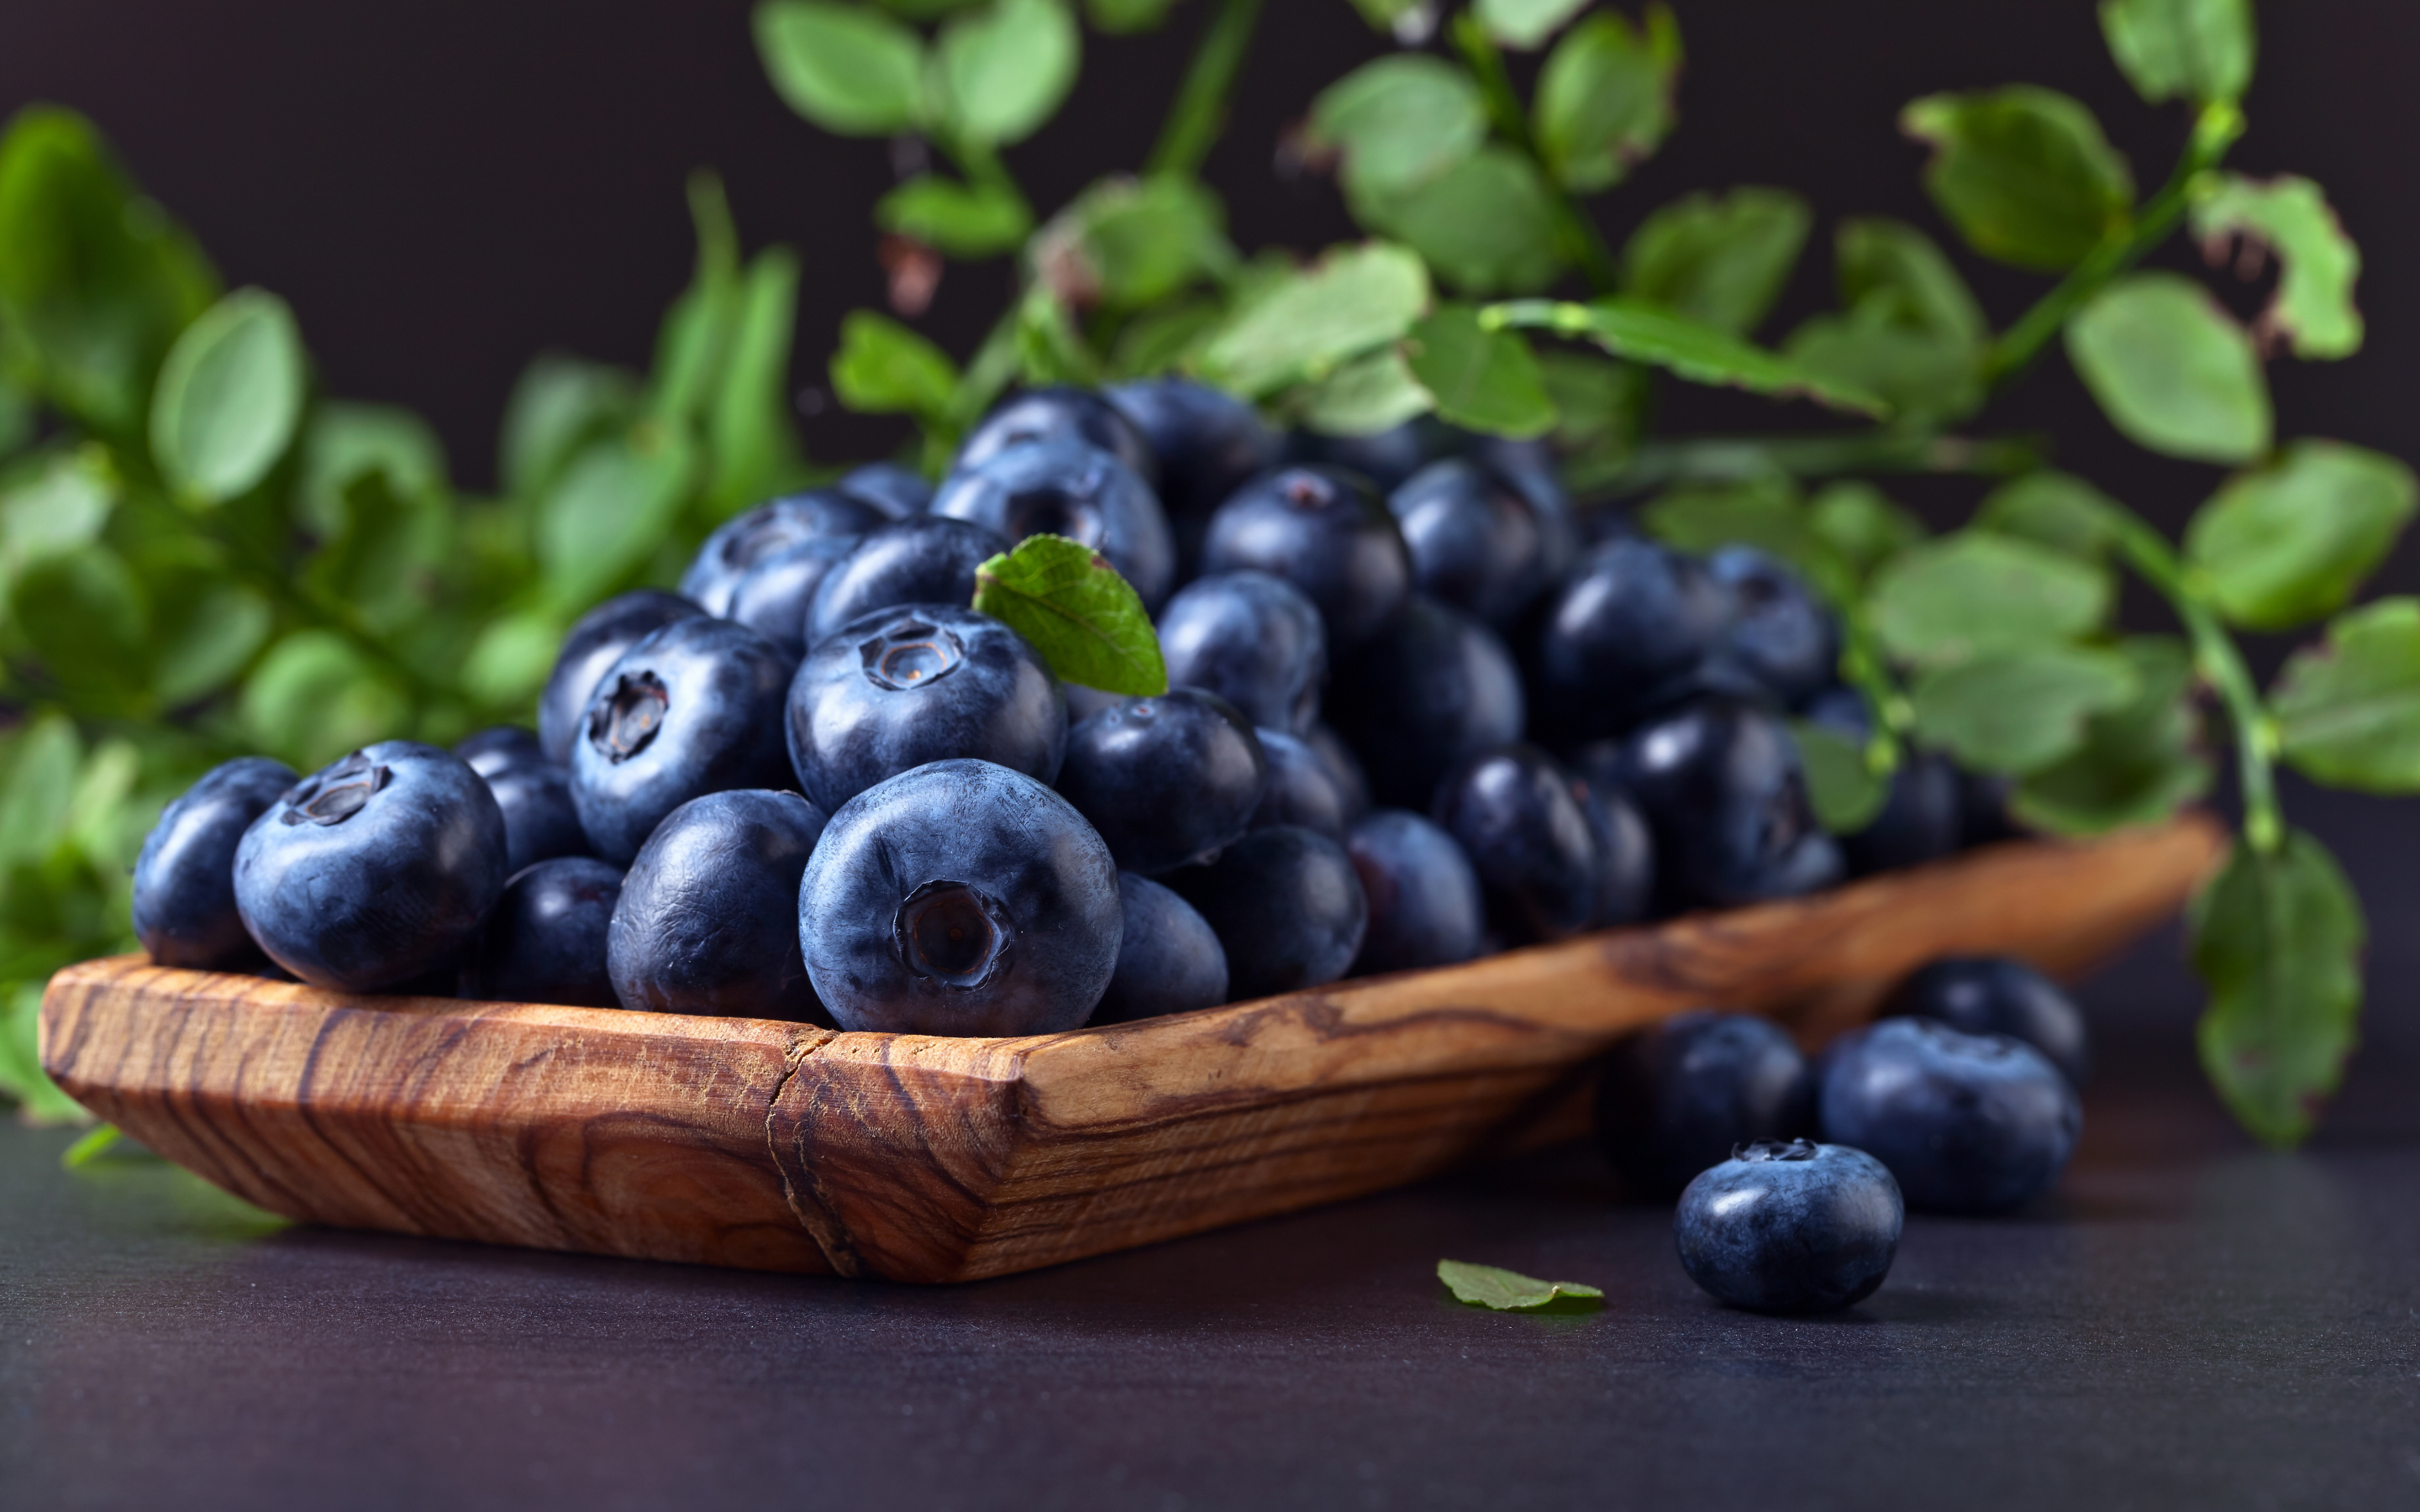 Kitchen, leaves, blueberries, fruits, 2880x1800 wallpaper